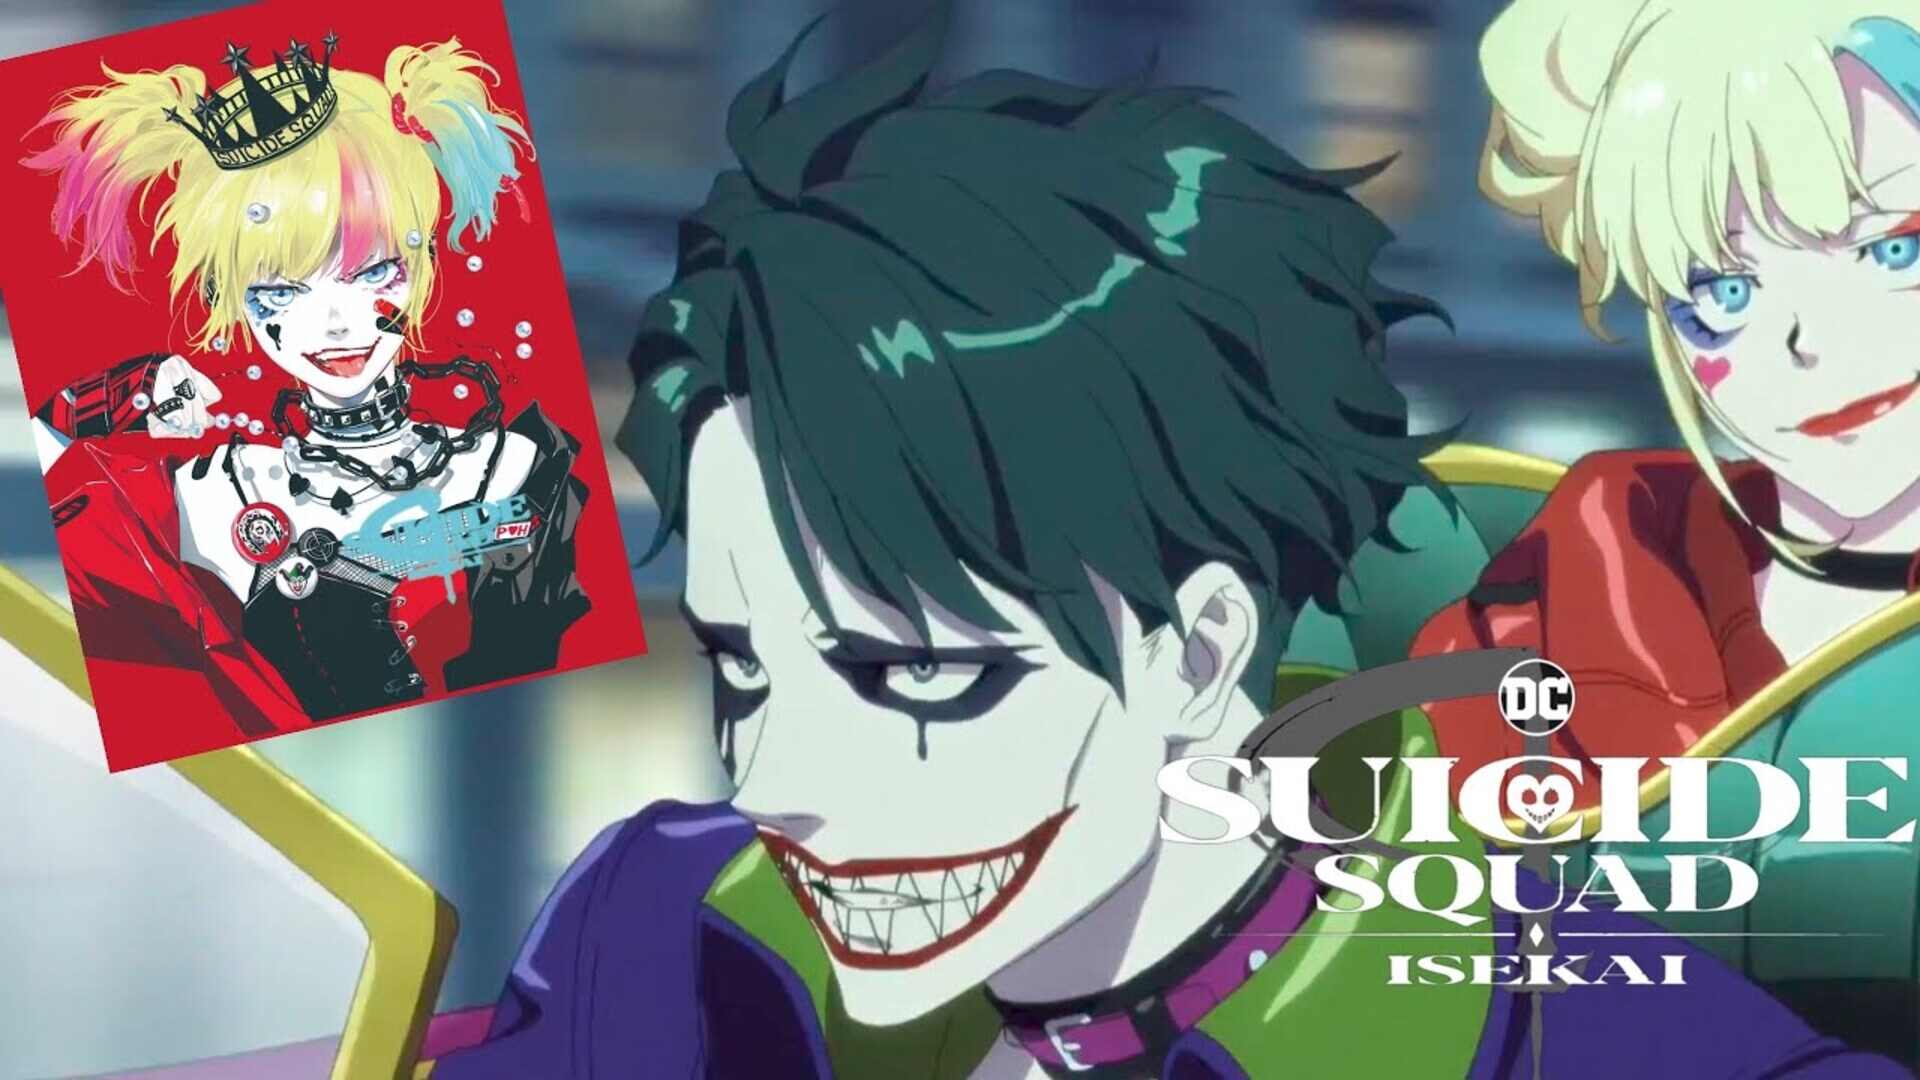 Suicide Squad ISEKAI Original Anime is revealed: Warner Bros. Japan, and WIT Studio Collaborate for the anime series